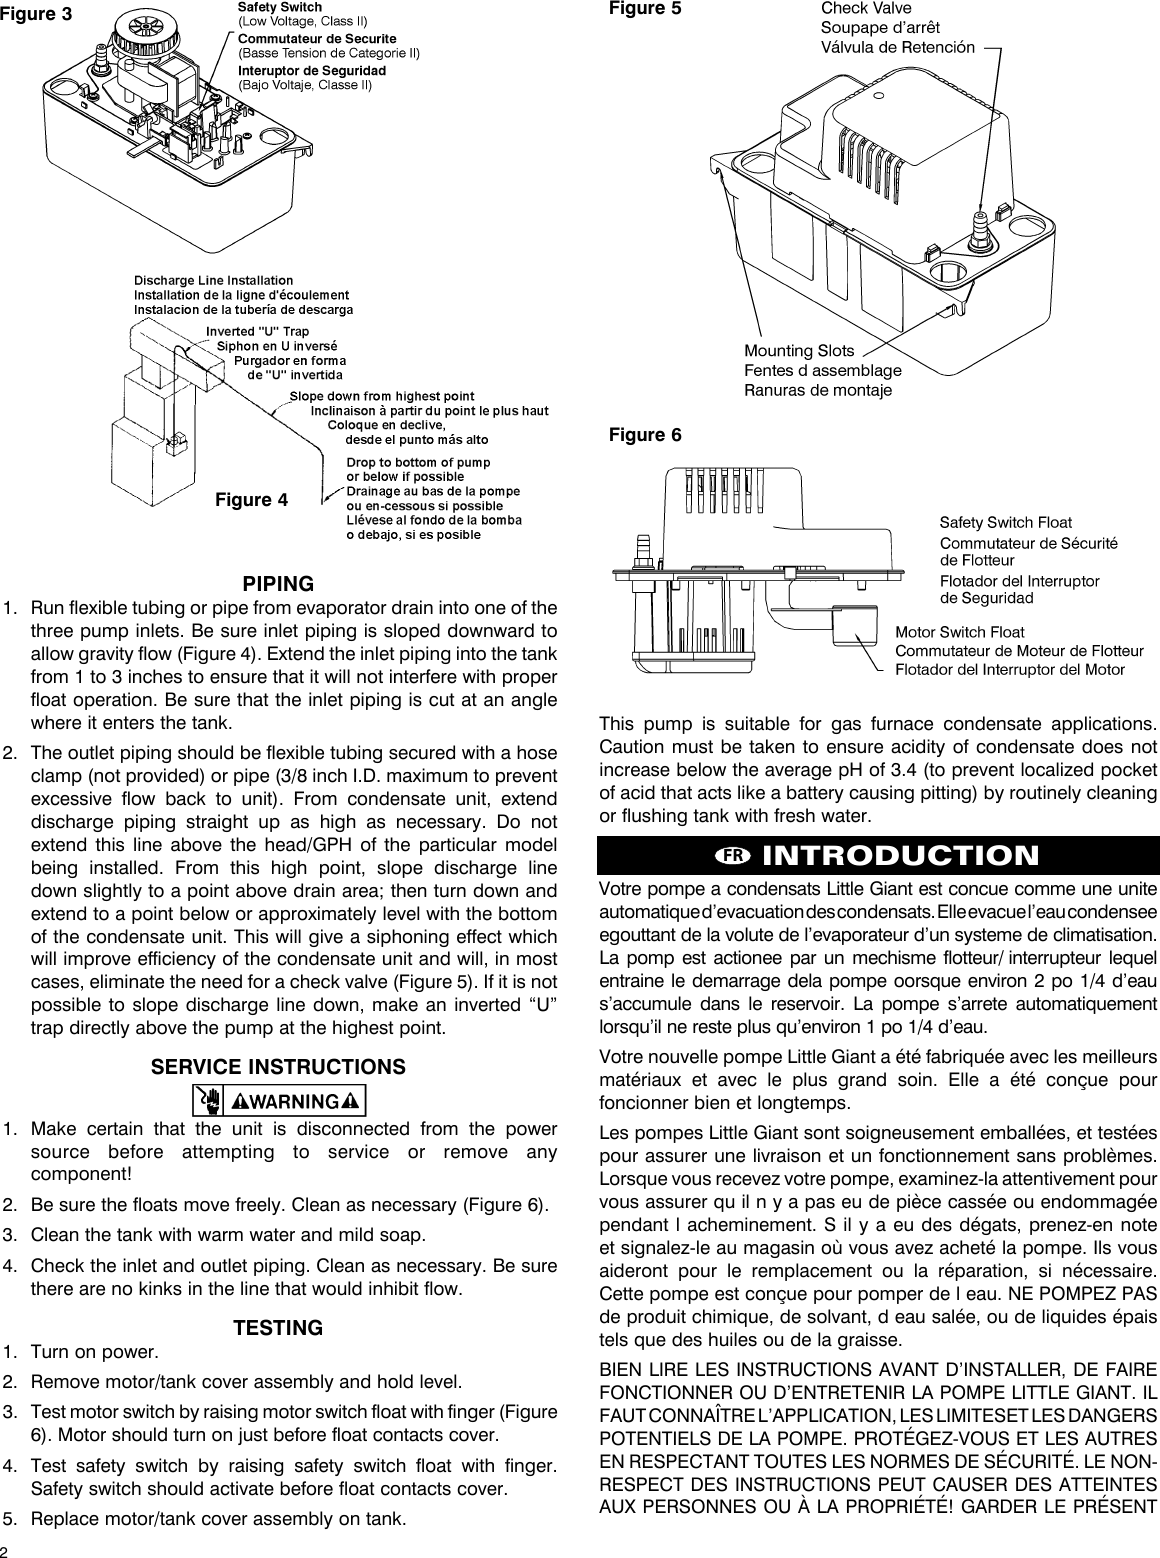 Page 2 of 8 - 18015 1 Little Giant Vcma-20 User Guide 998086 09-057 Manual